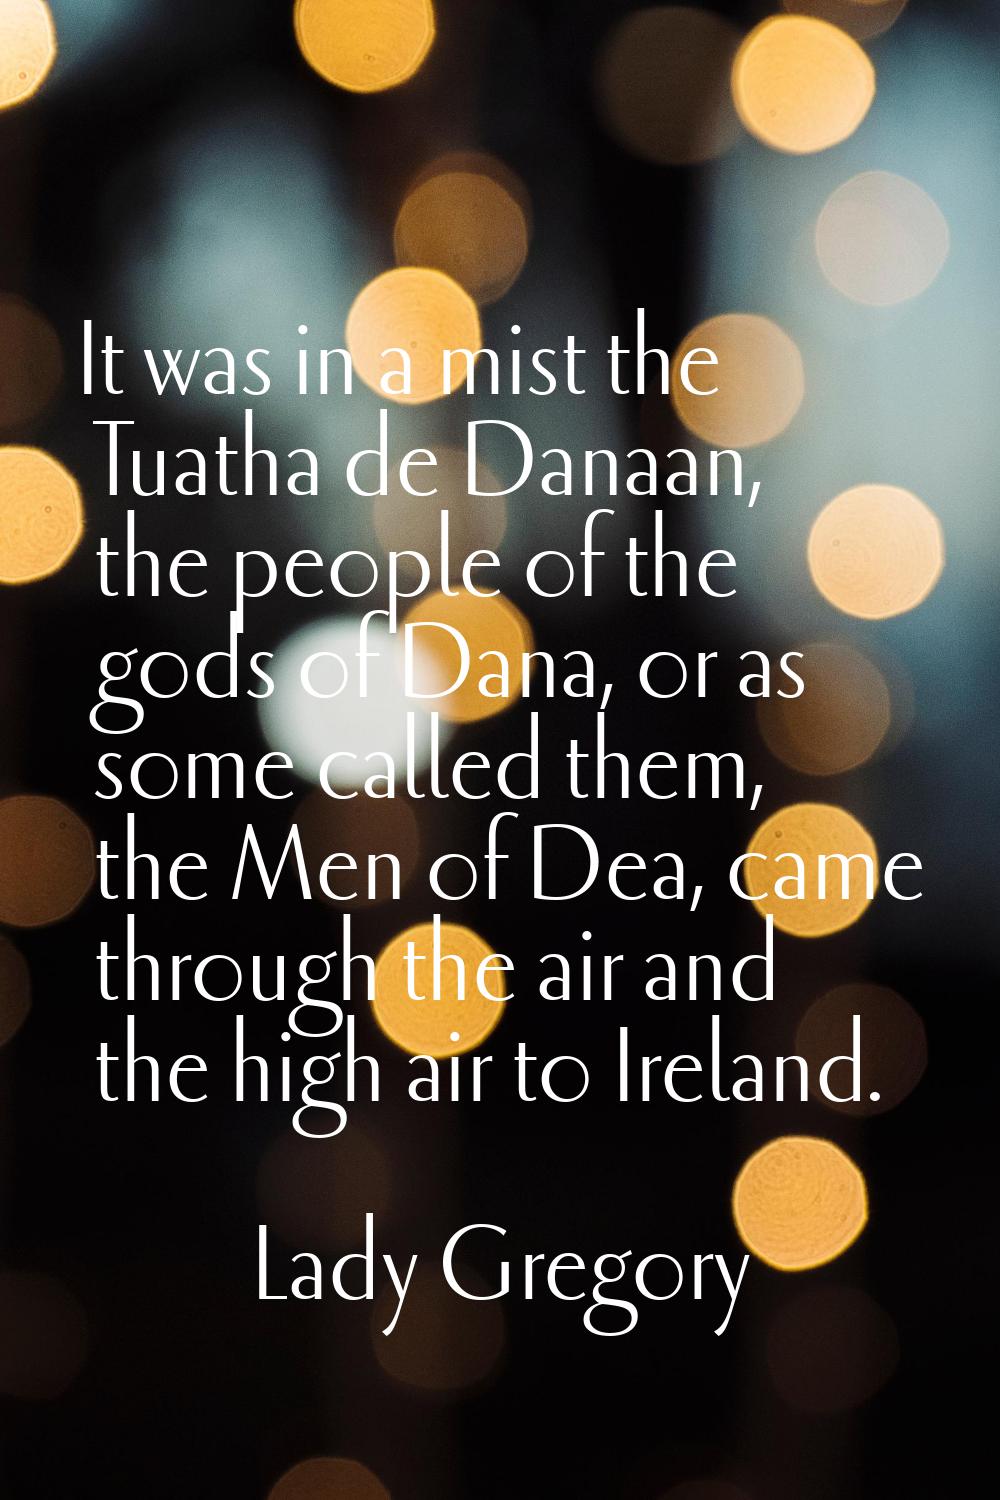 It was in a mist the Tuatha de Danaan, the people of the gods of Dana, or as some called them, the 